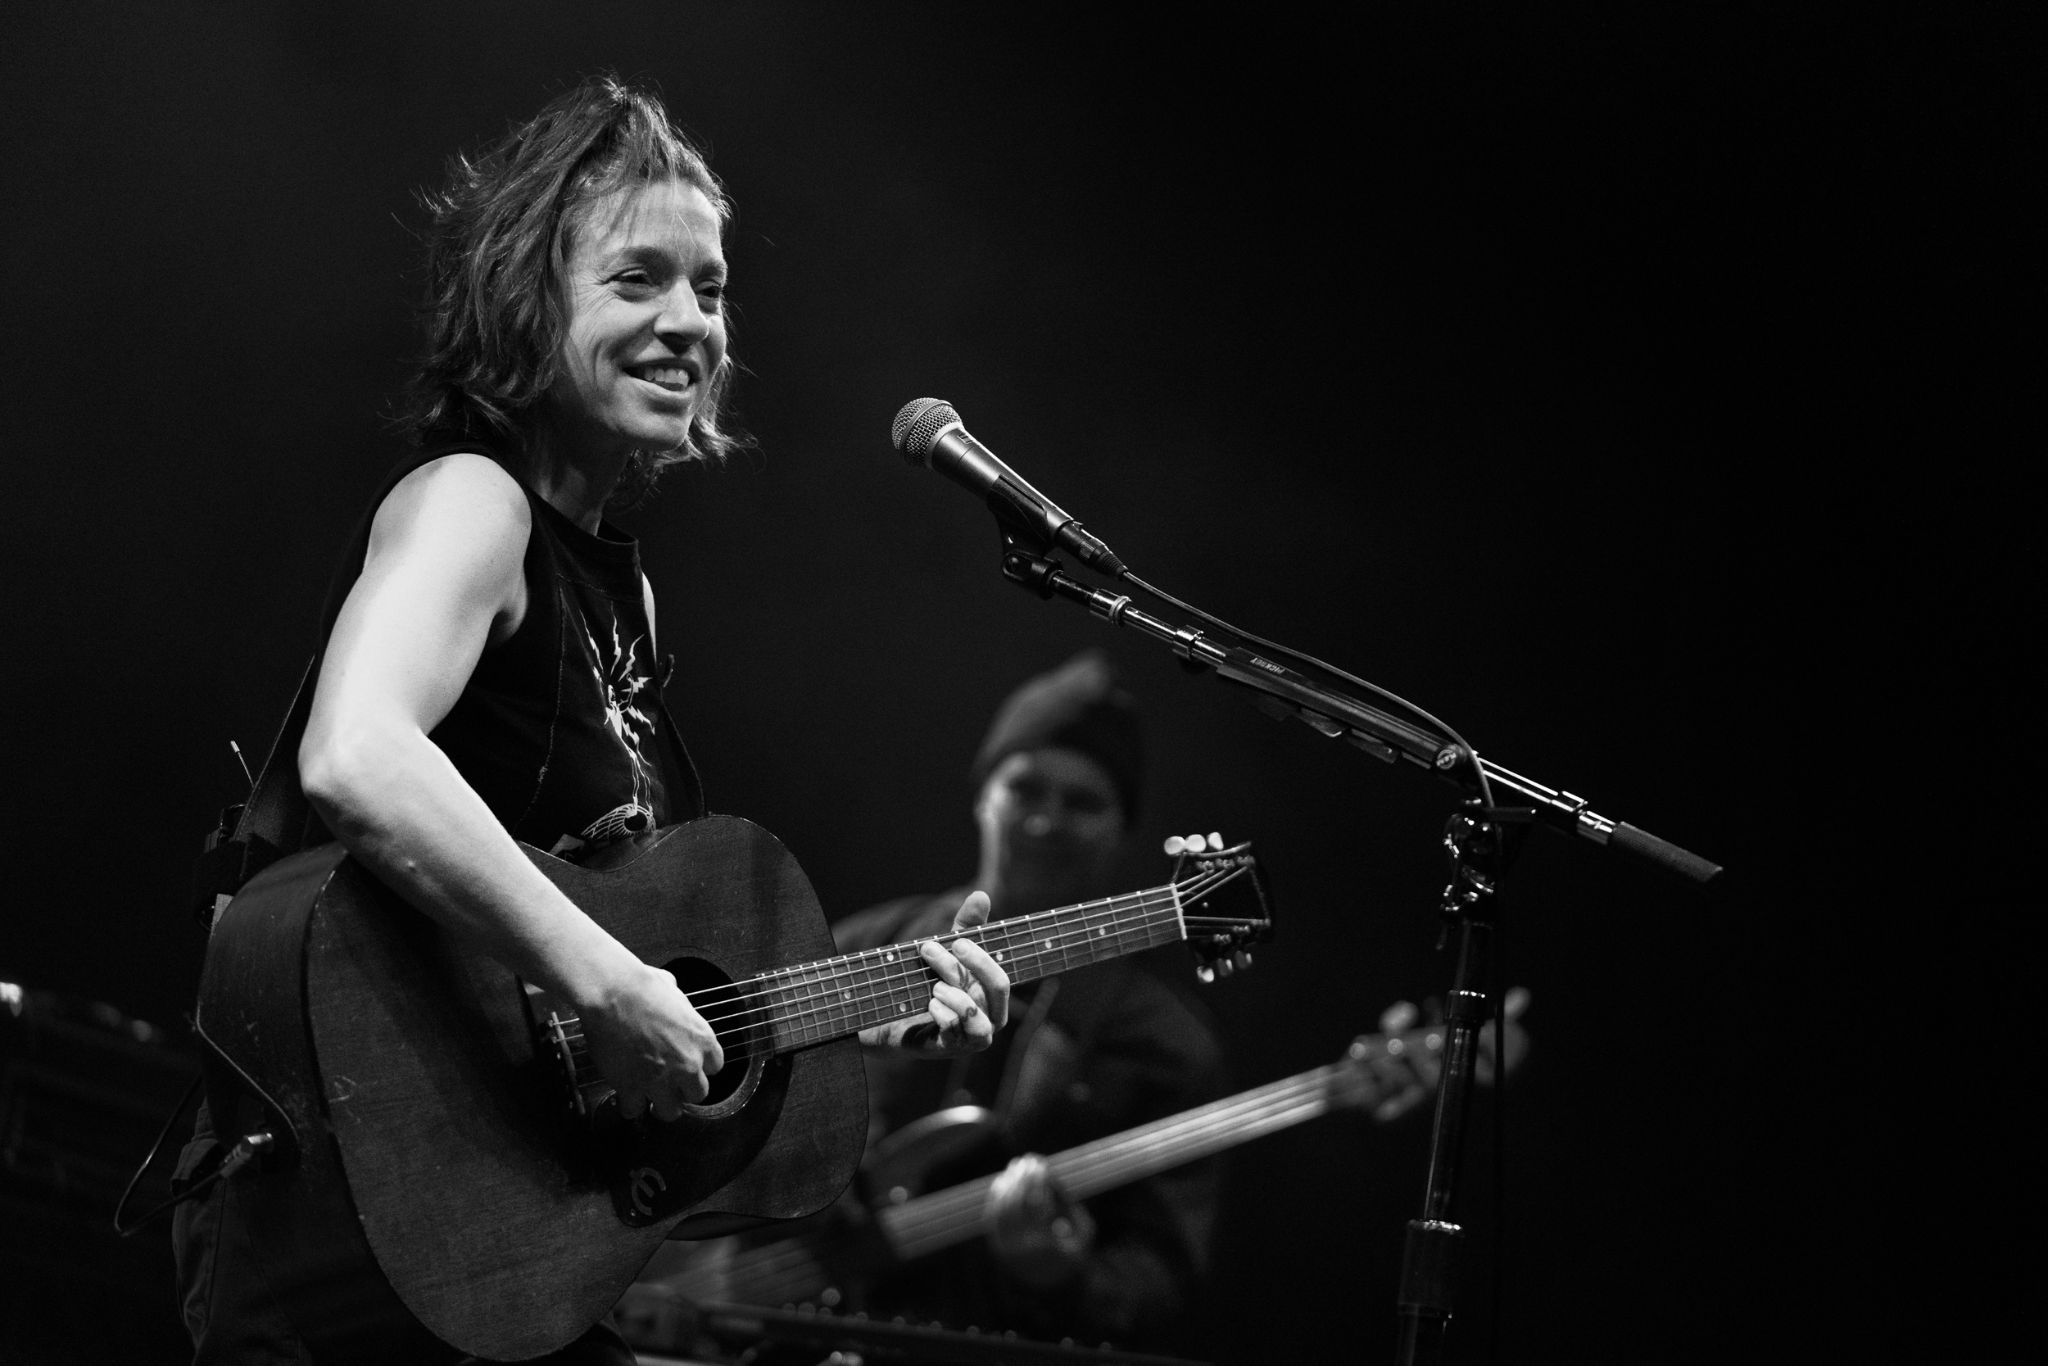 Ani DiFranco Schedules two Boulder Theater shows - 3/15/23 + 3/16/23 